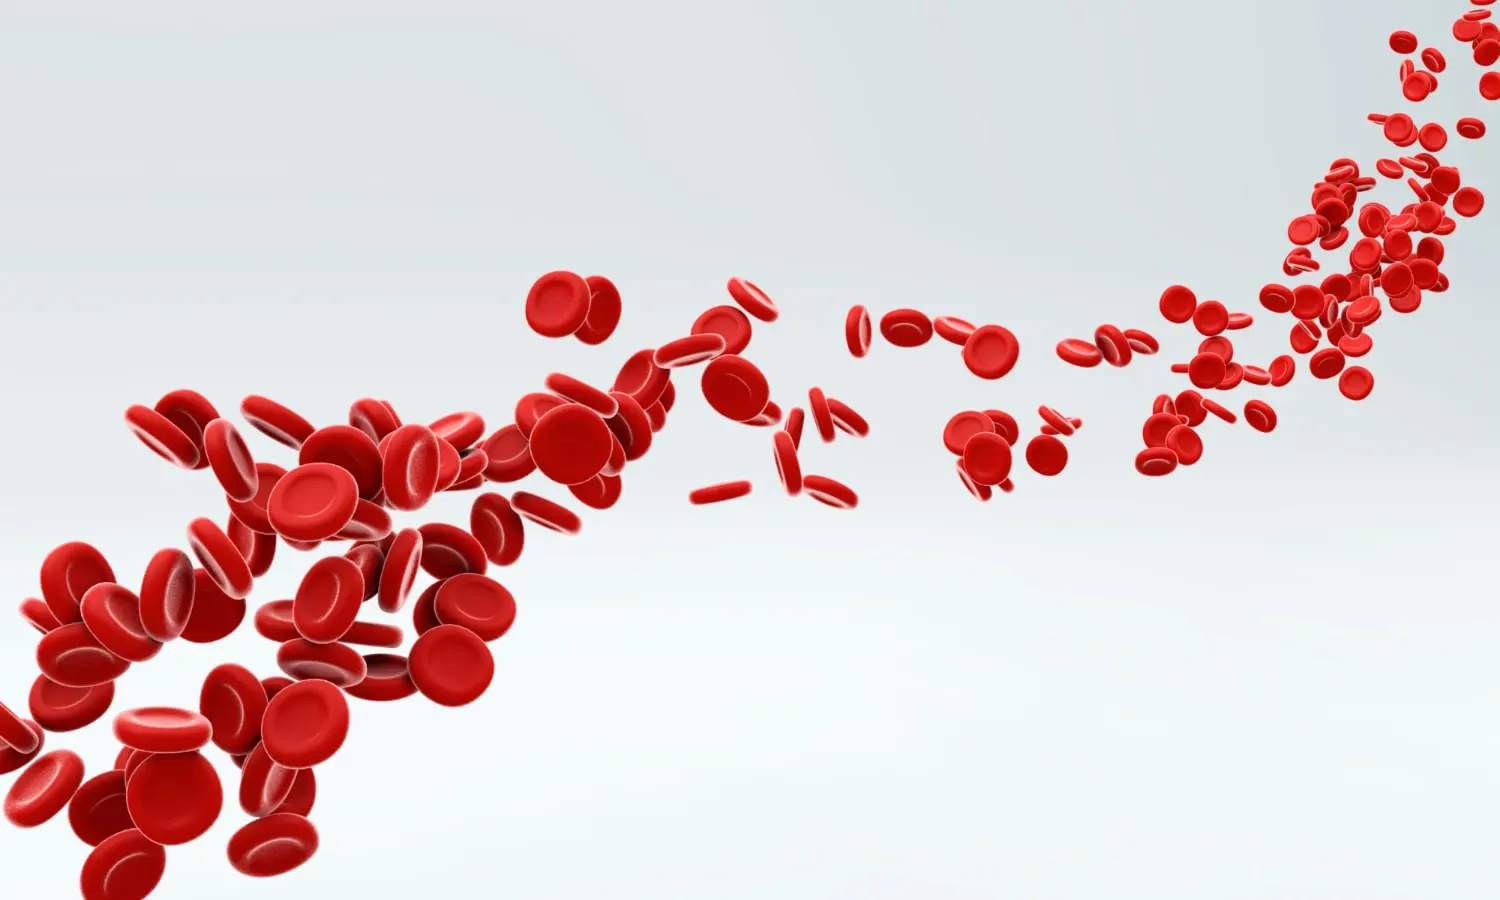 red-blood-cells-flowing-through-artery